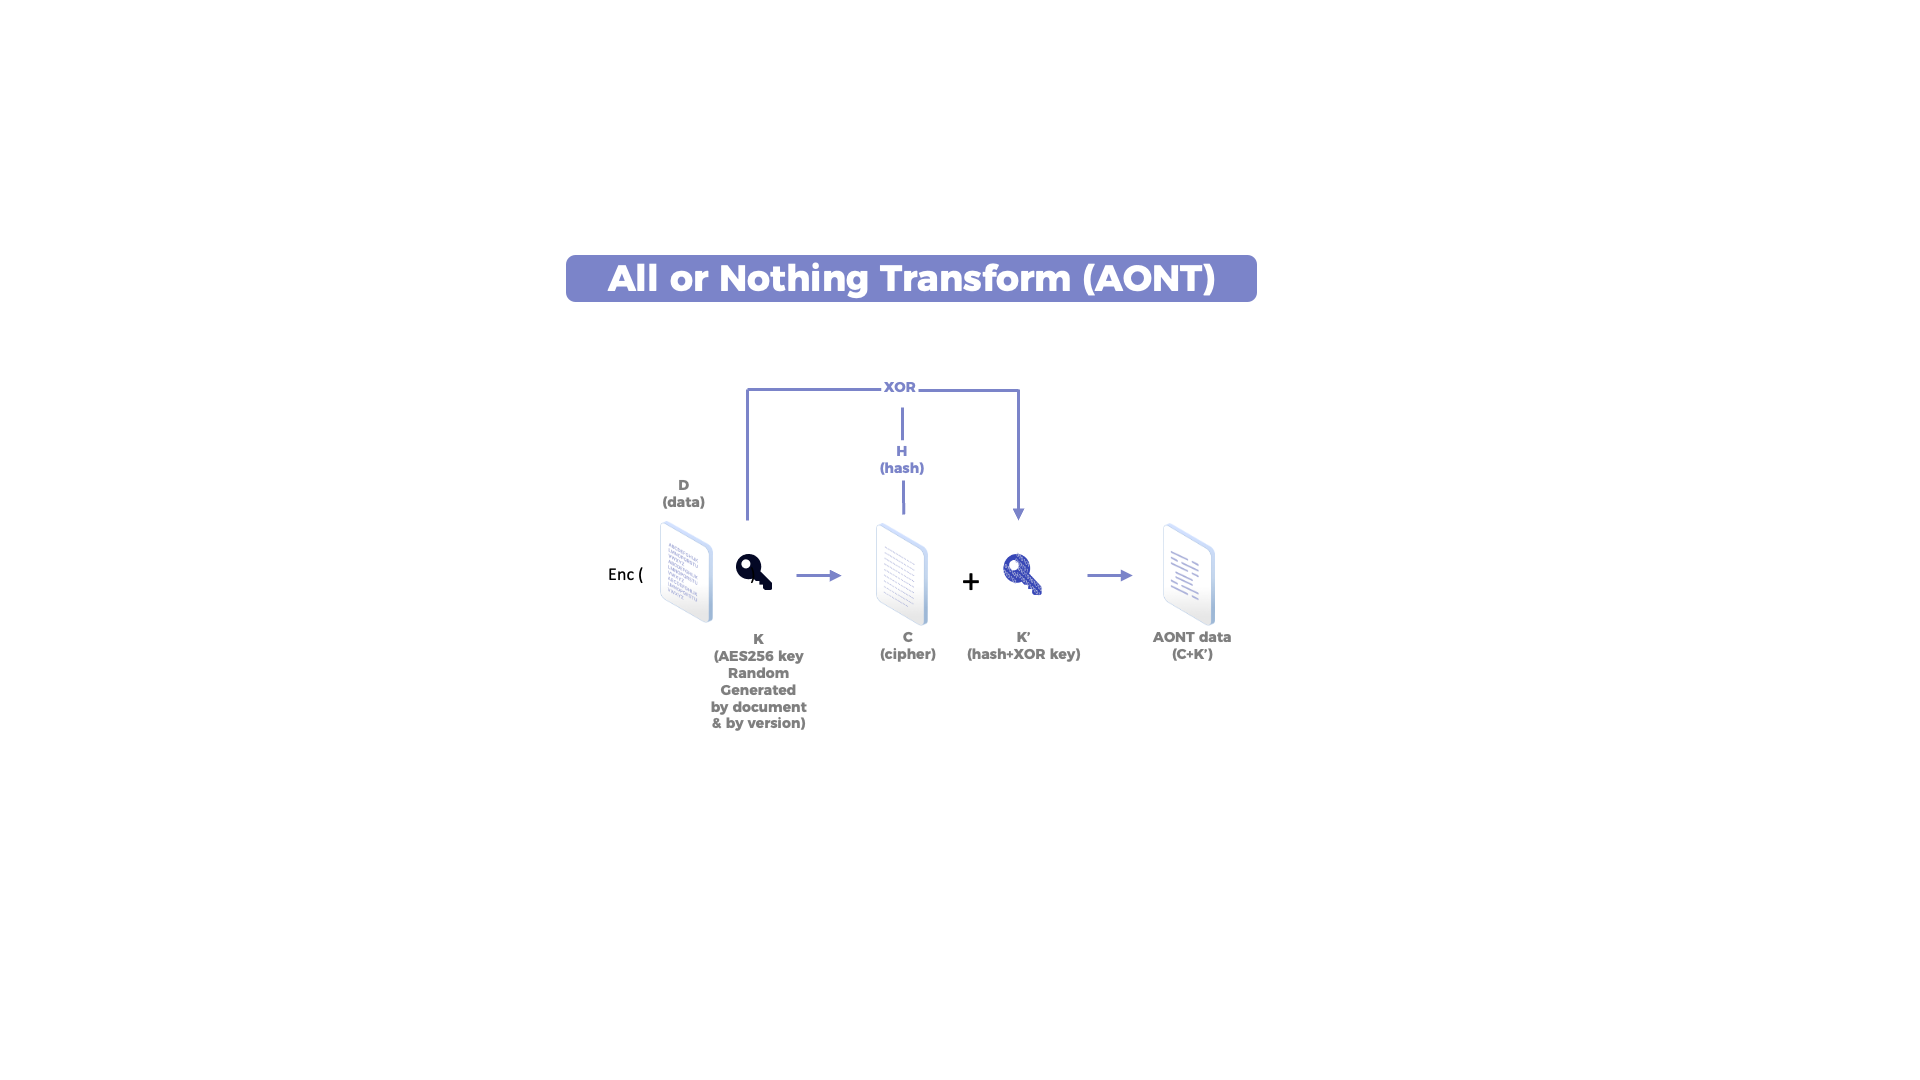 Figure: All or Nothing Transform algorithm